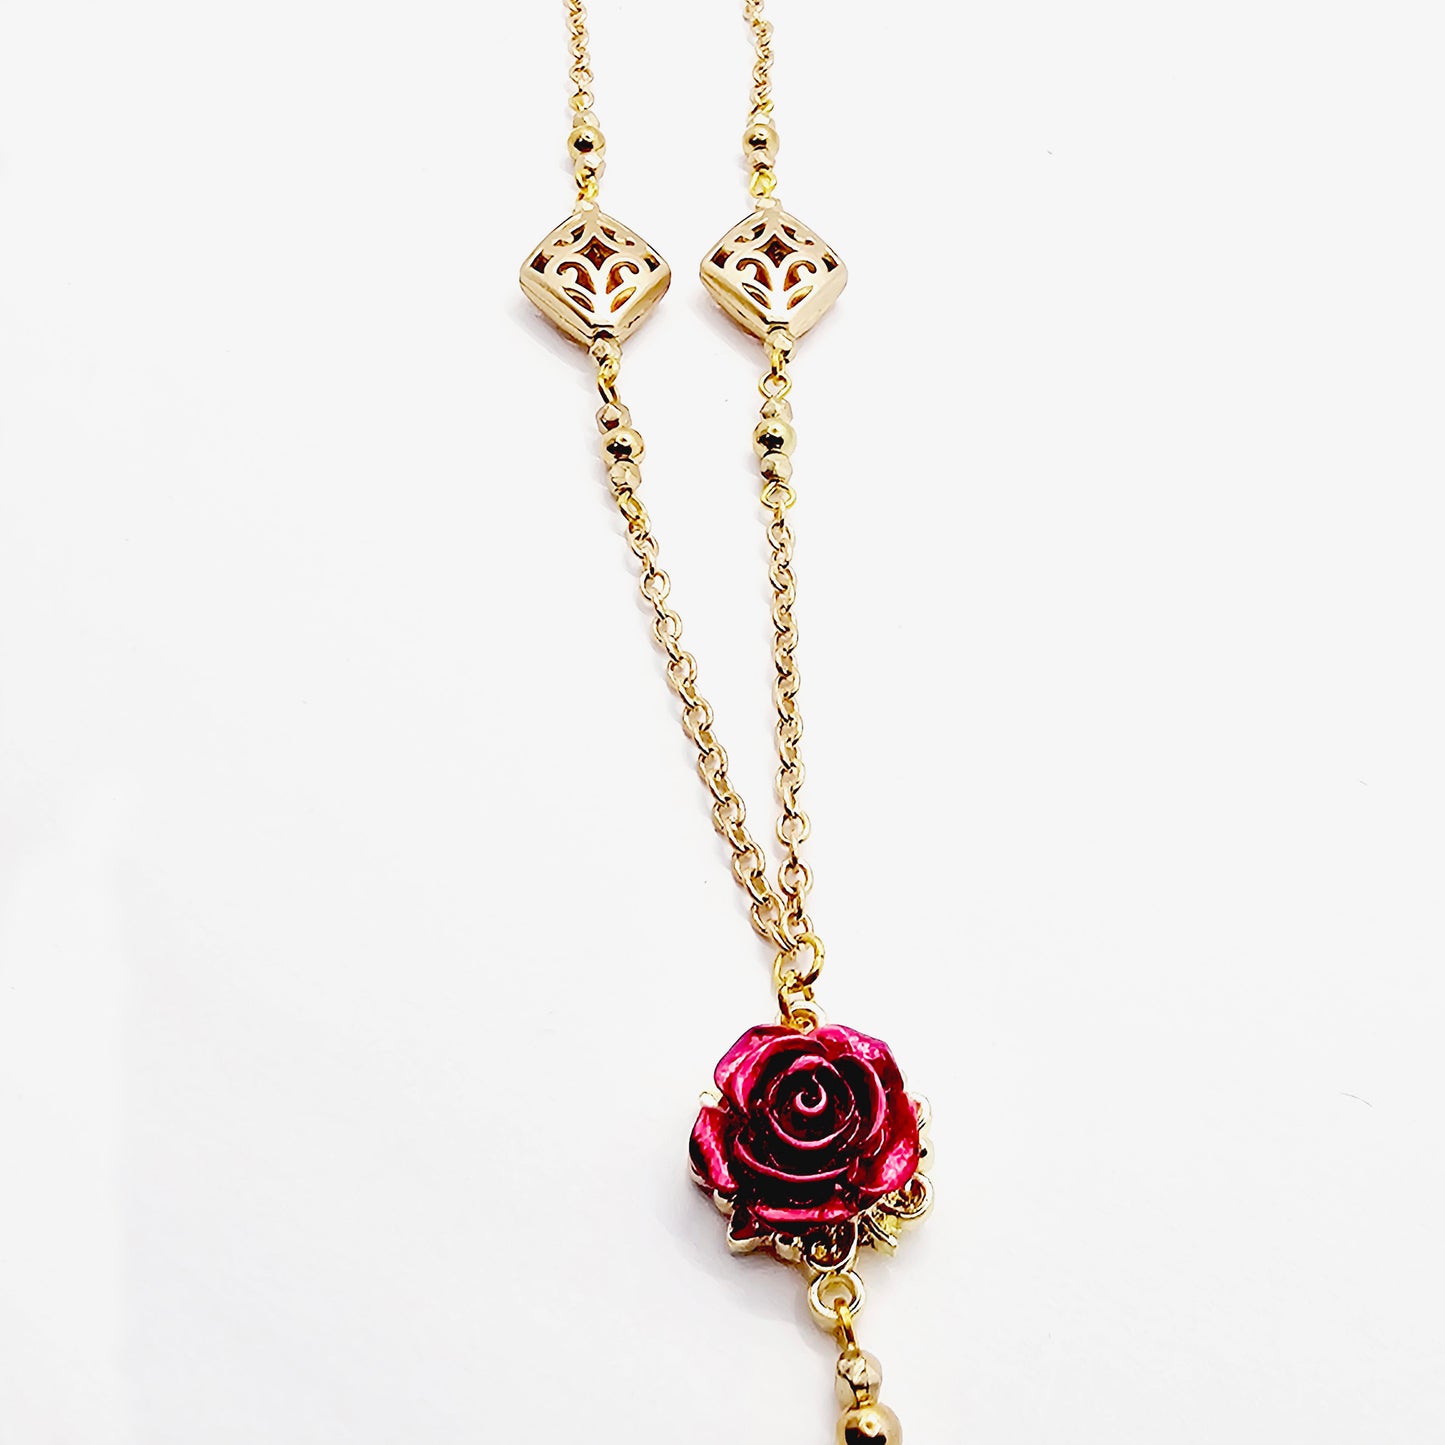 Elegant Gold Necklace to Nipple with Red Roses and Your Choice of Nipple Attachment, Non Piercing. Nooses or Nipple Clamps.